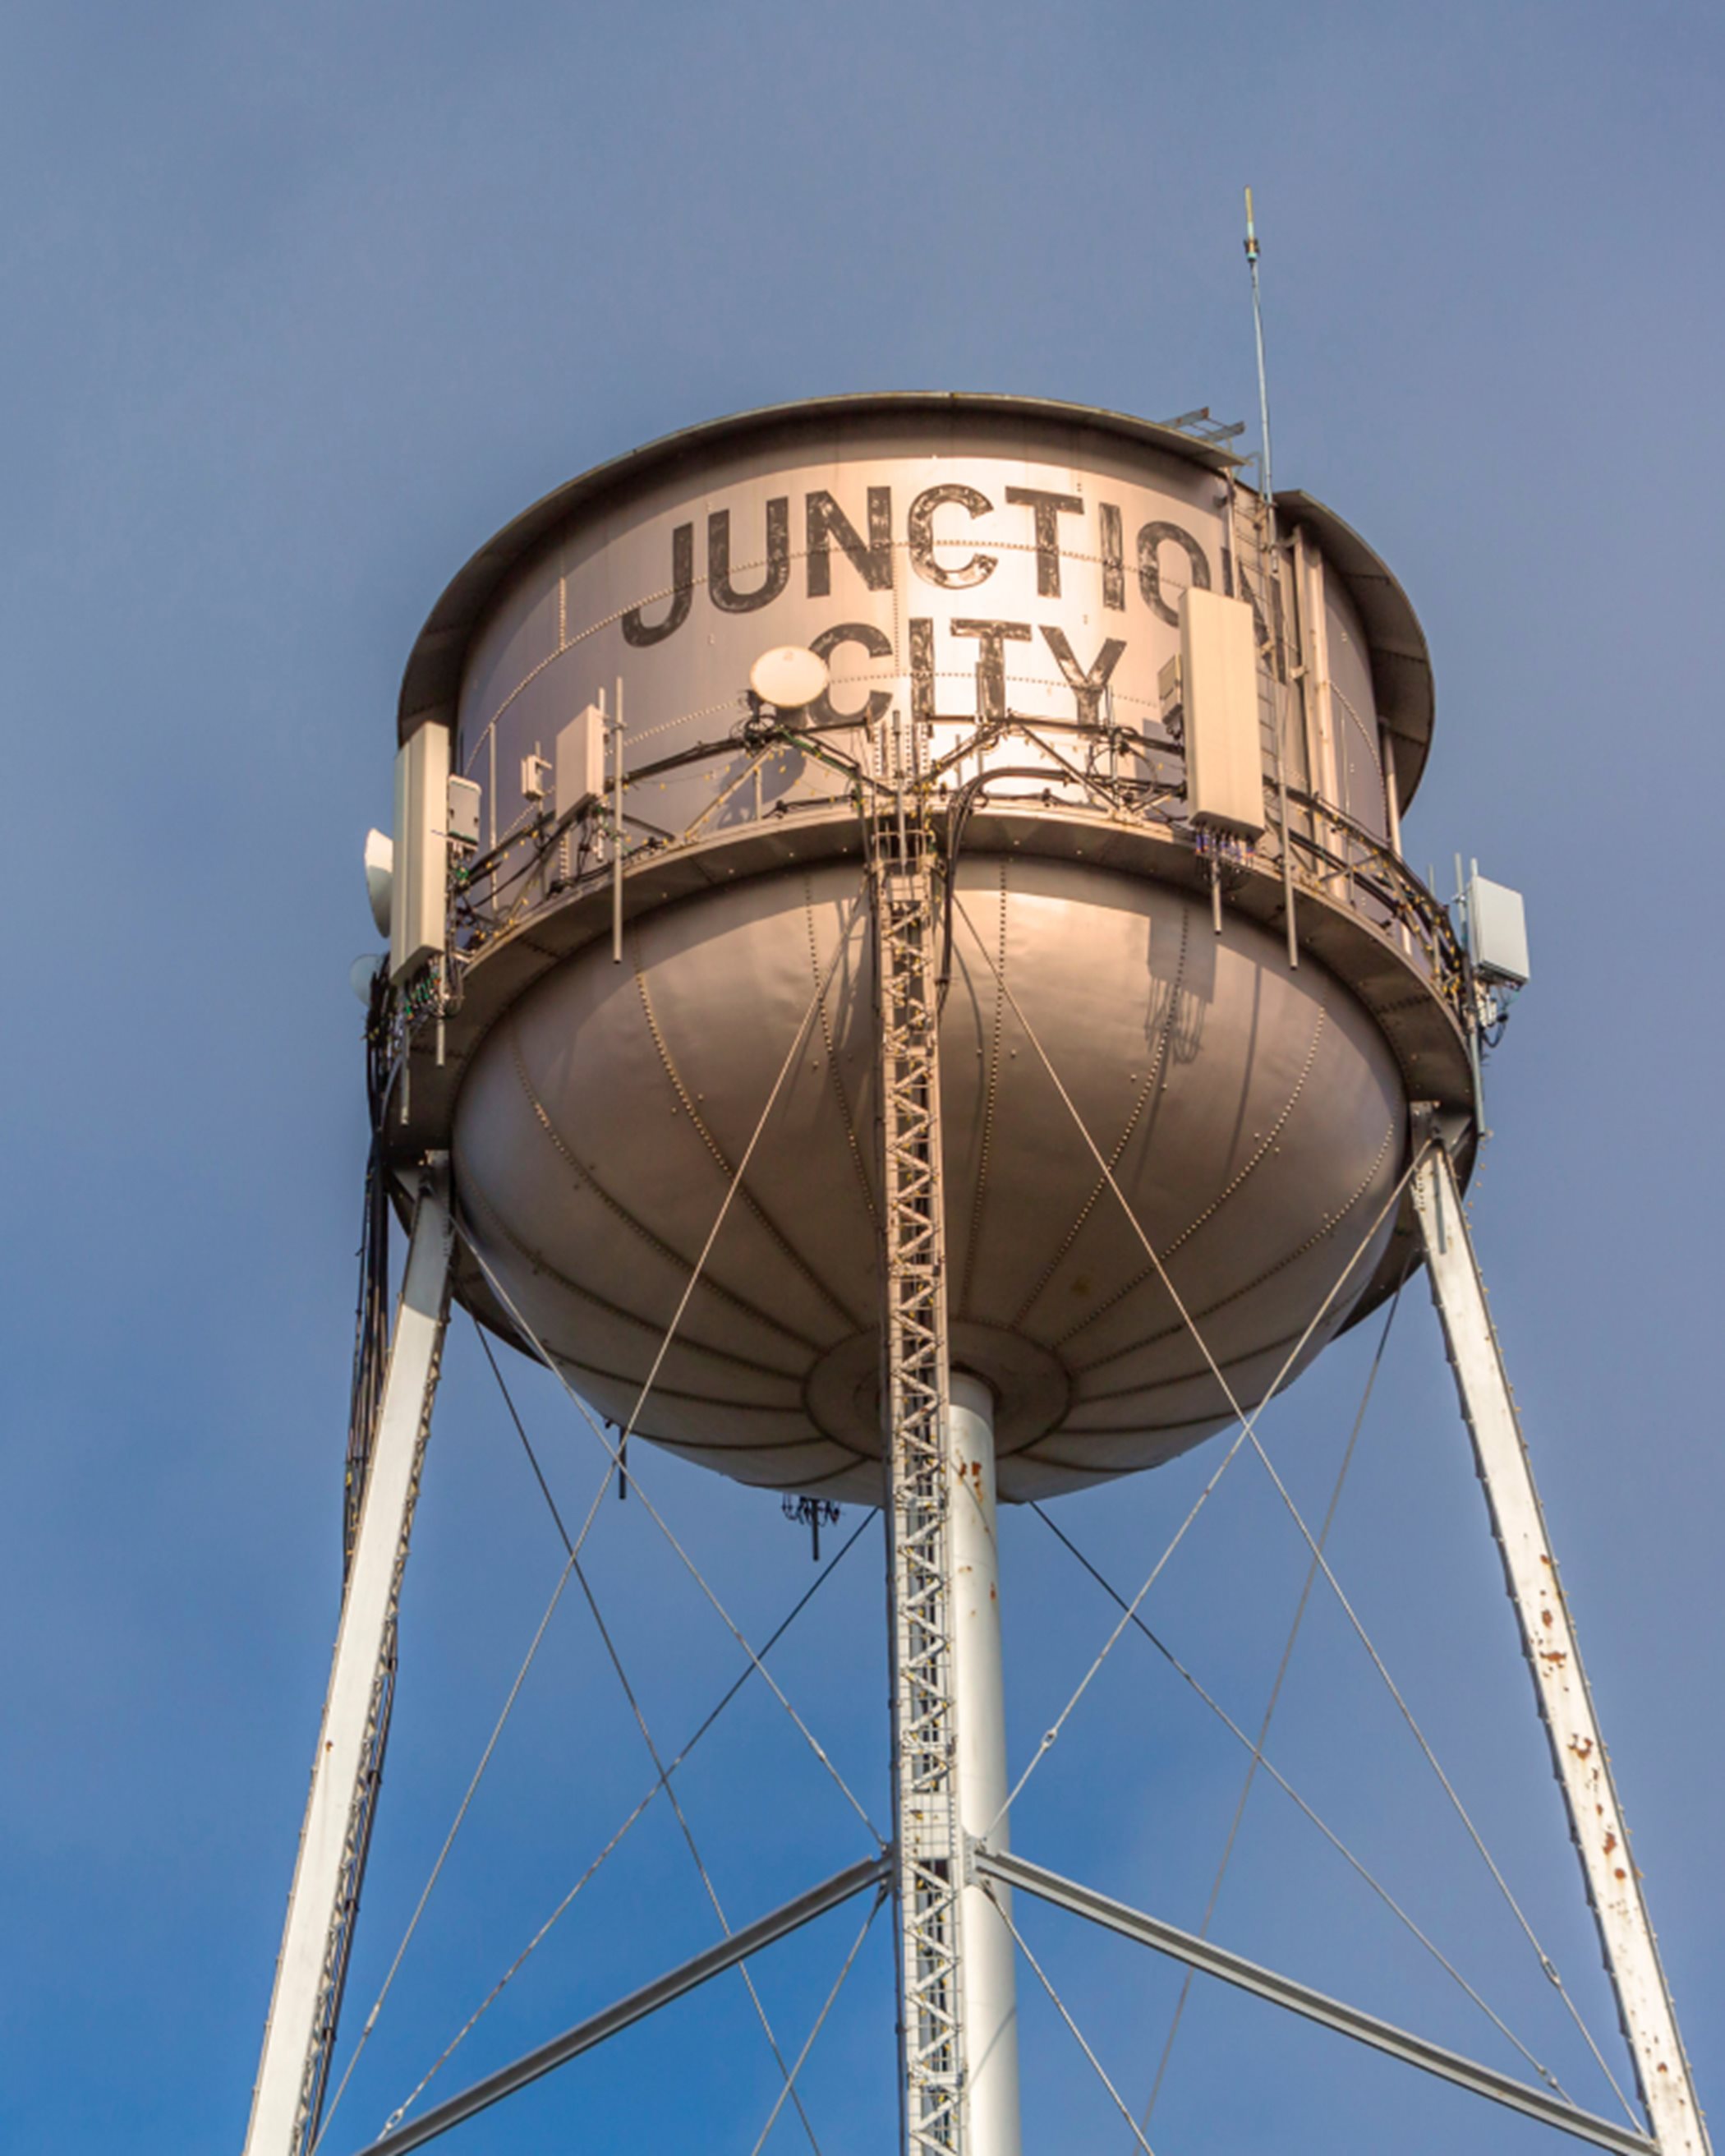 The Reserve Junction City water tower